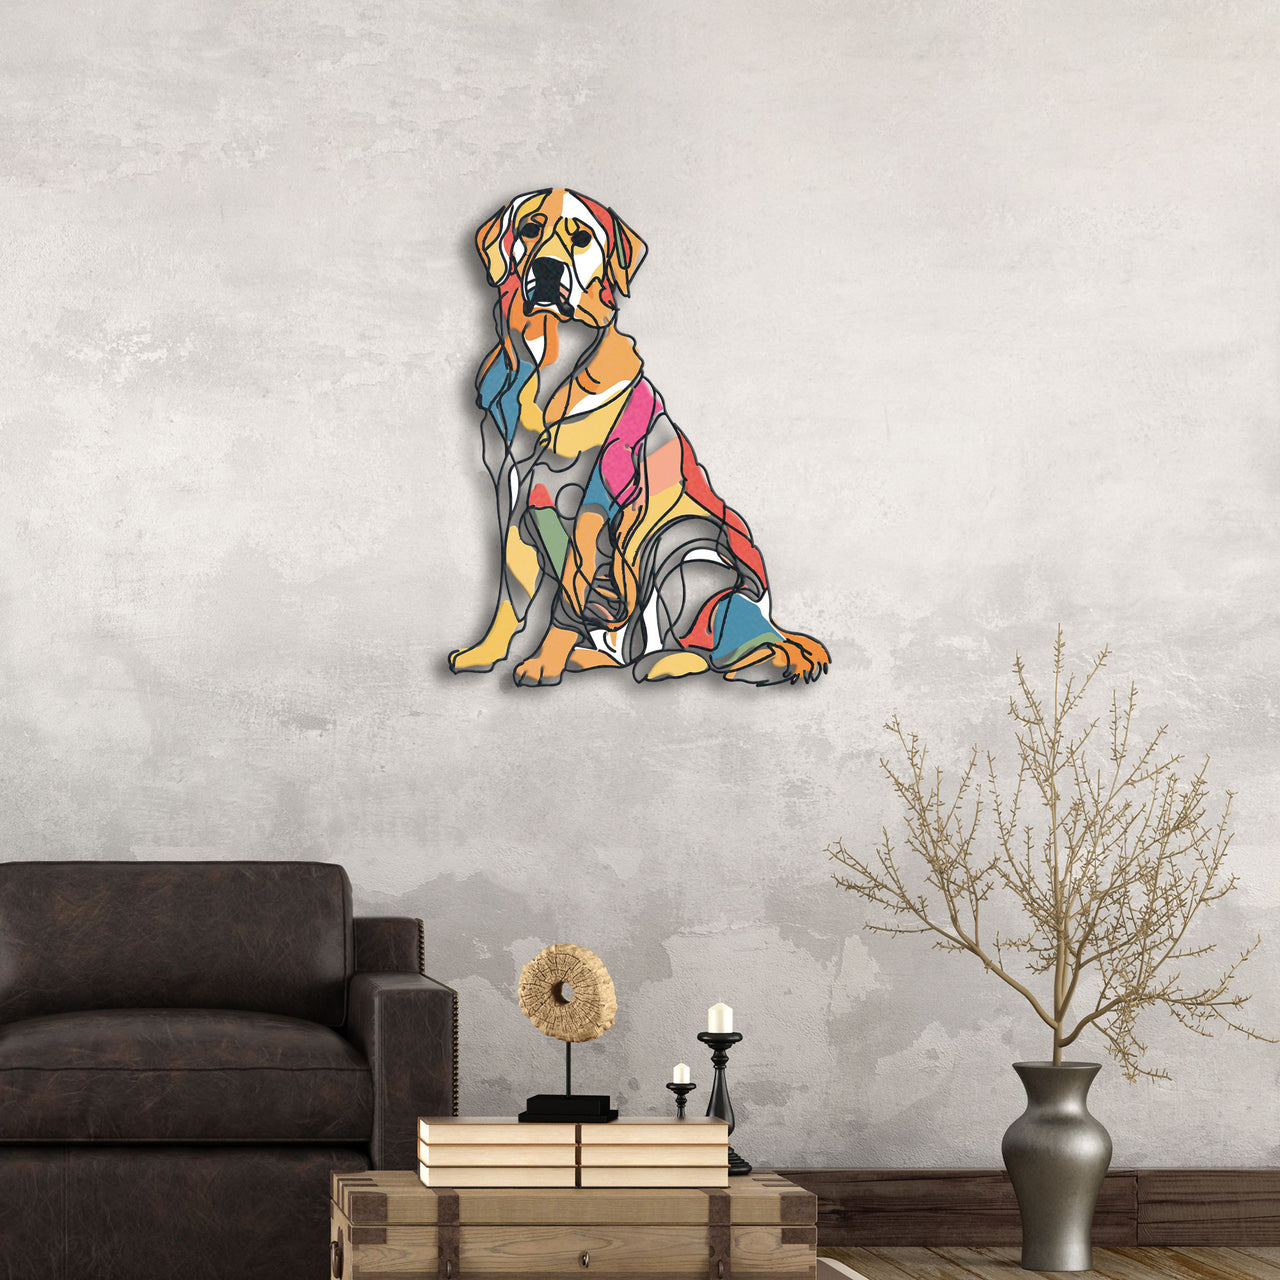 Abstract Golden Retriever Metal Wall Art, Whimsical Home Decor for Dog Lovers, Housewarming Gift